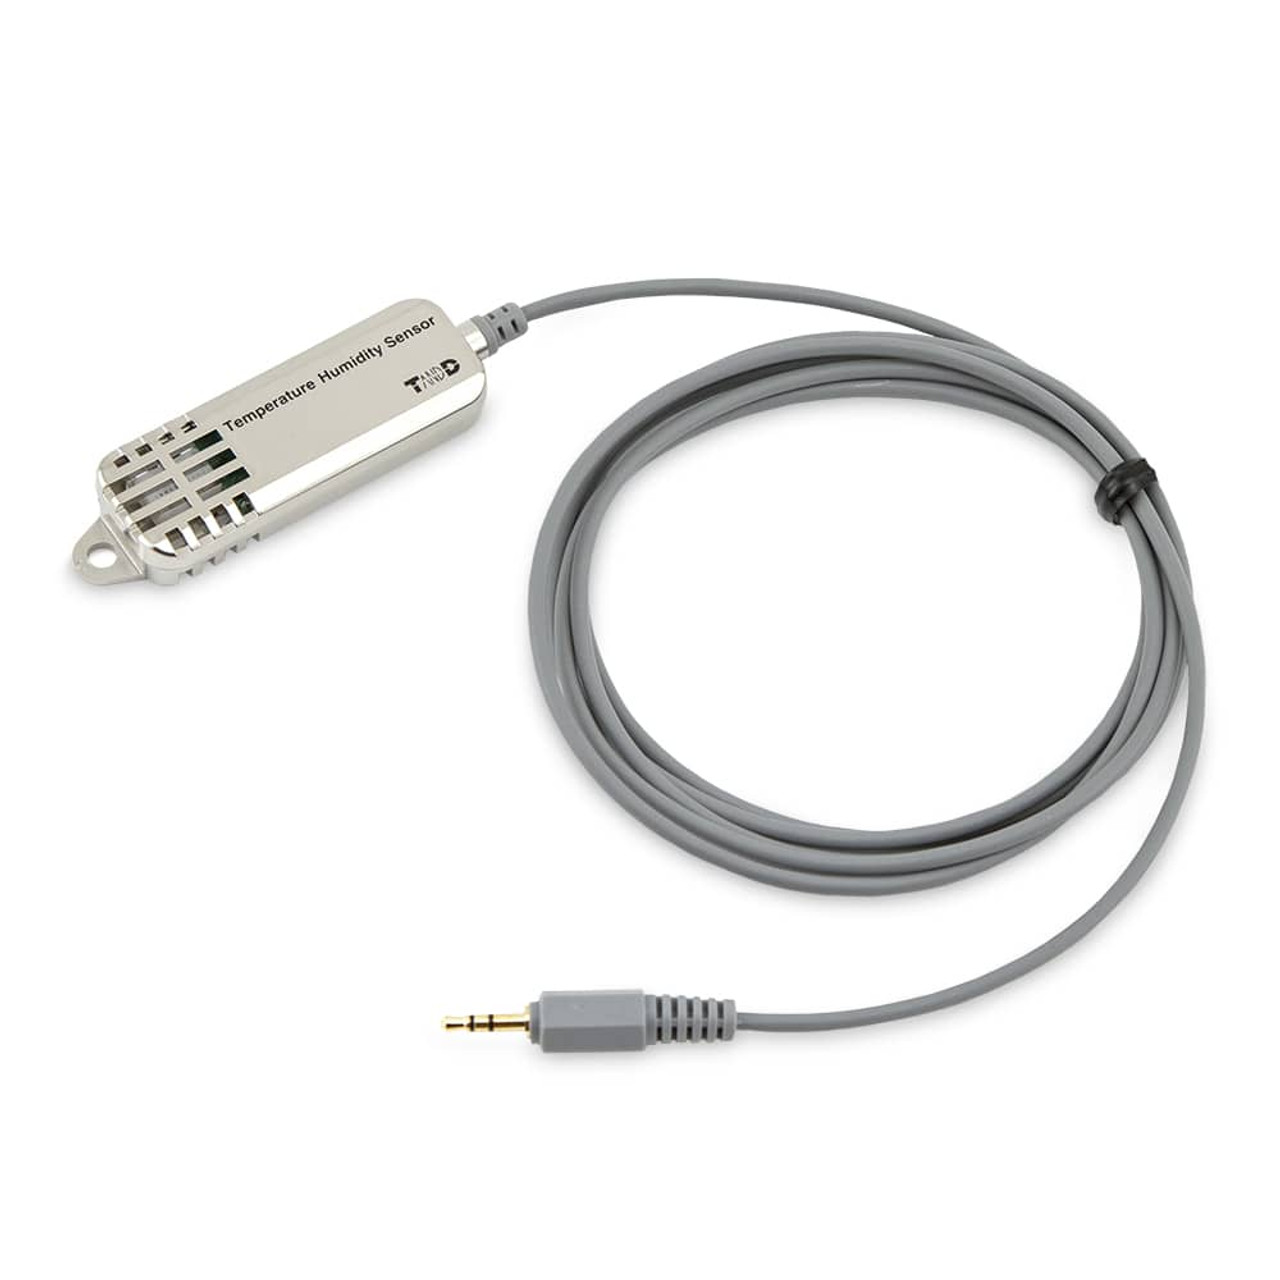 External Temperature and Humidity Sensor - High Precision Type for 700,  7wf/nw & RTR-574 series.